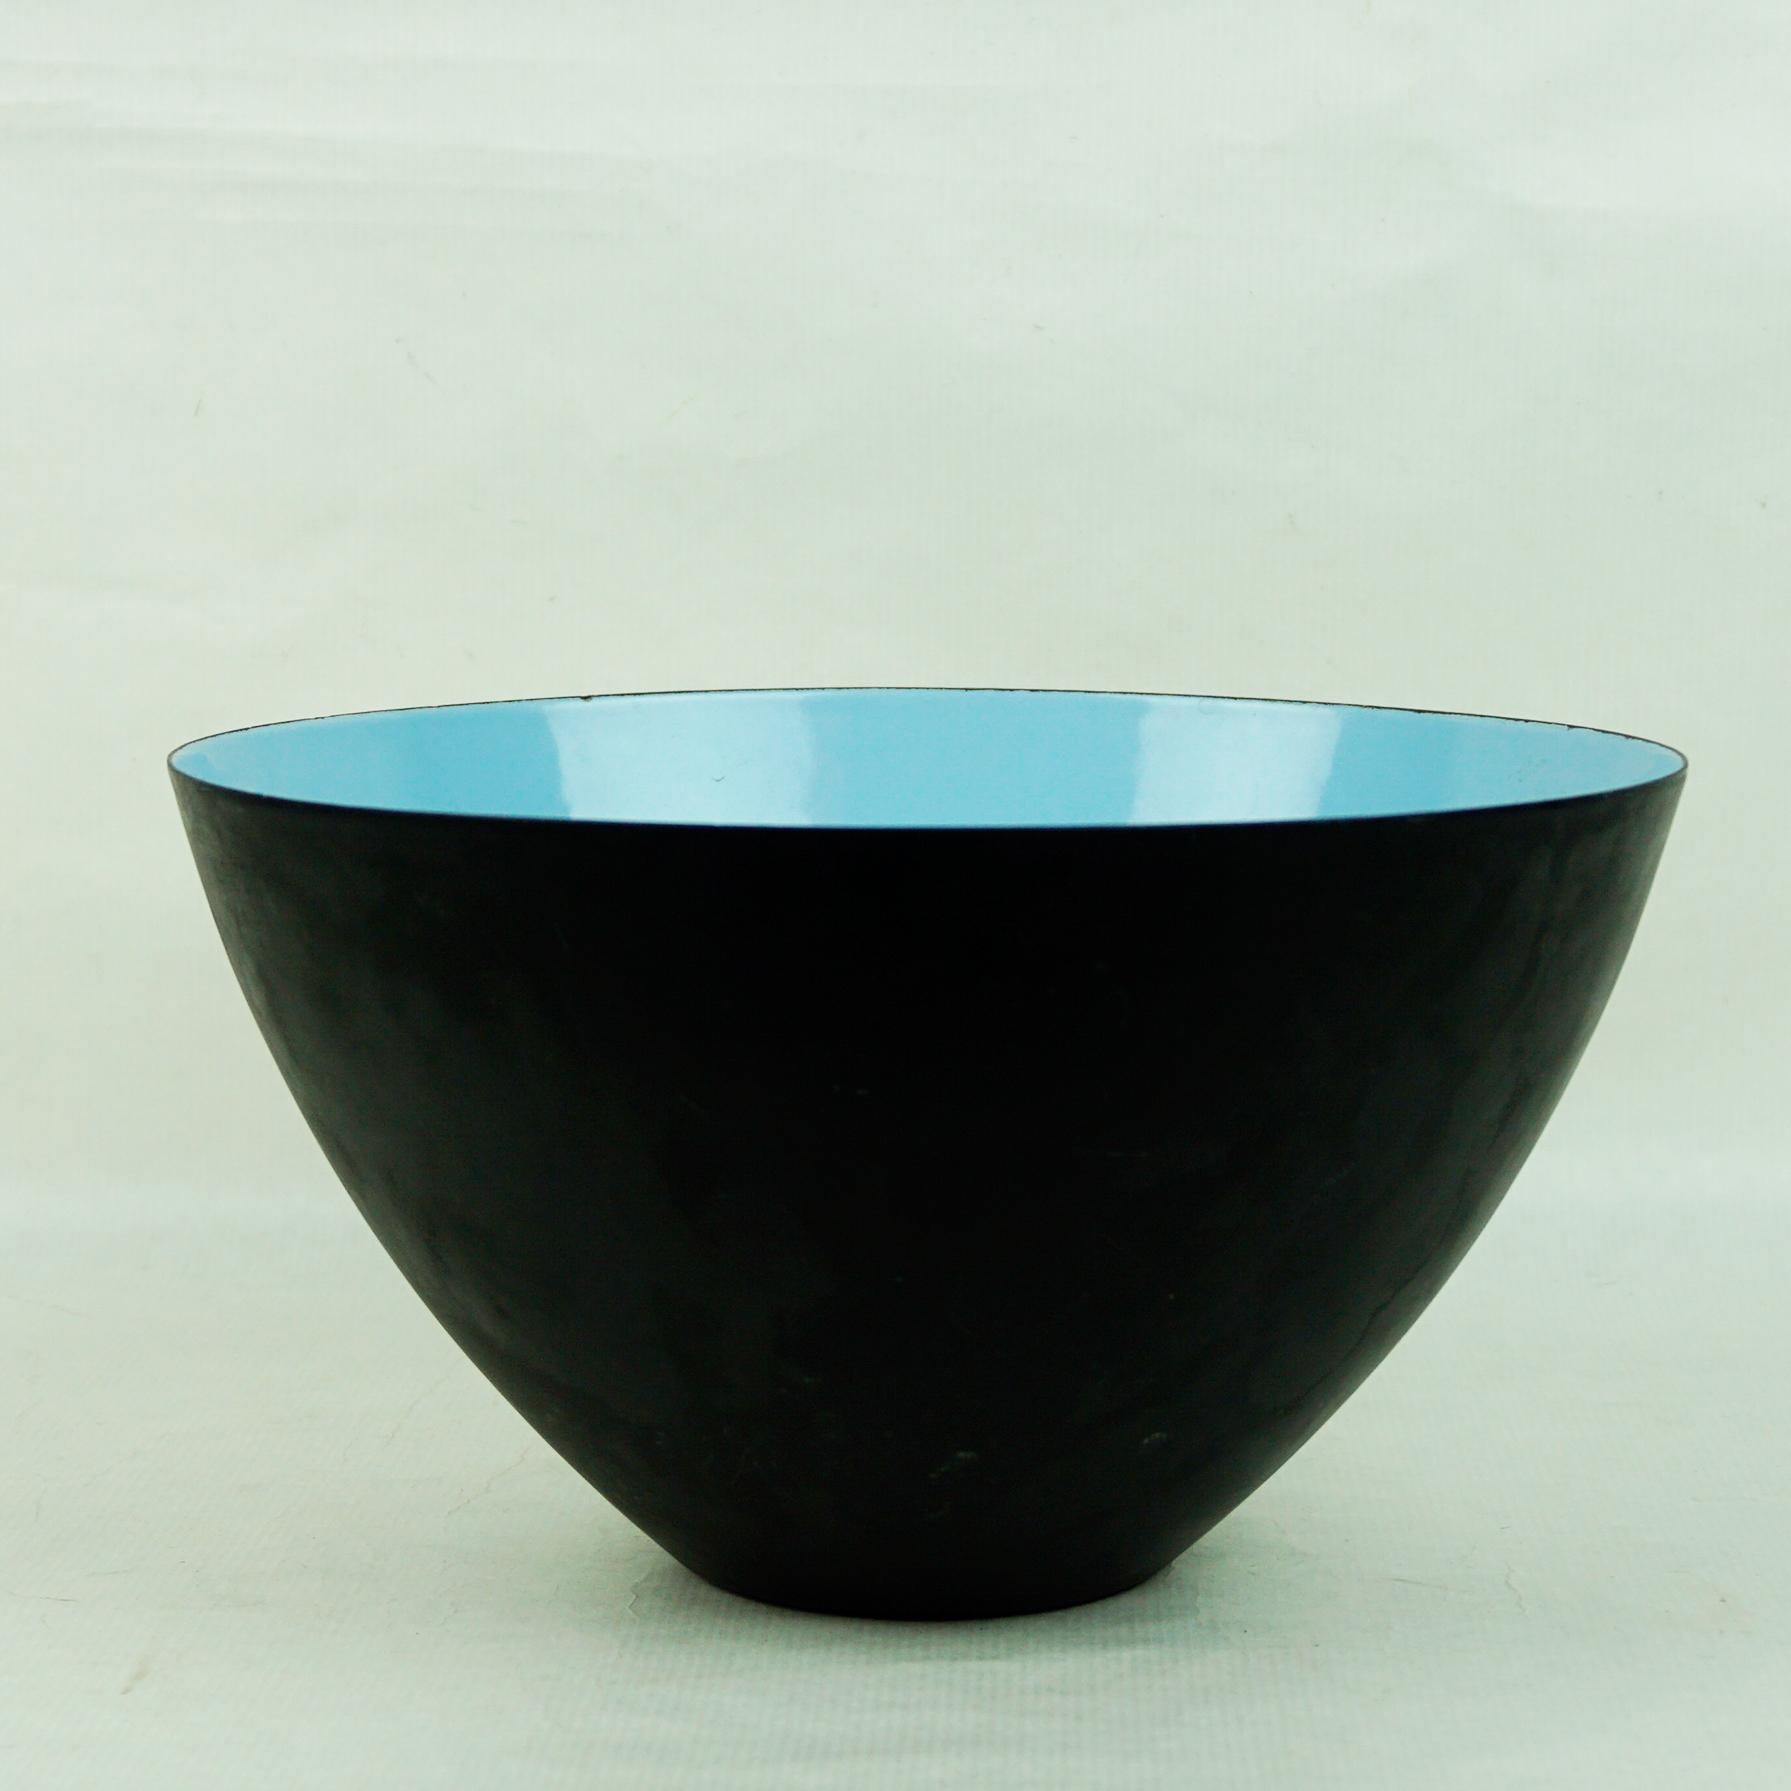 A stylish and large Danish Krenit Turquoise enameled black metal bowl designed by Herbert Krenchel and dating from the 1960's. The bowl stands on a narrow flat rounded foot and is of deep rounded form with the inner bowl decorated in bright